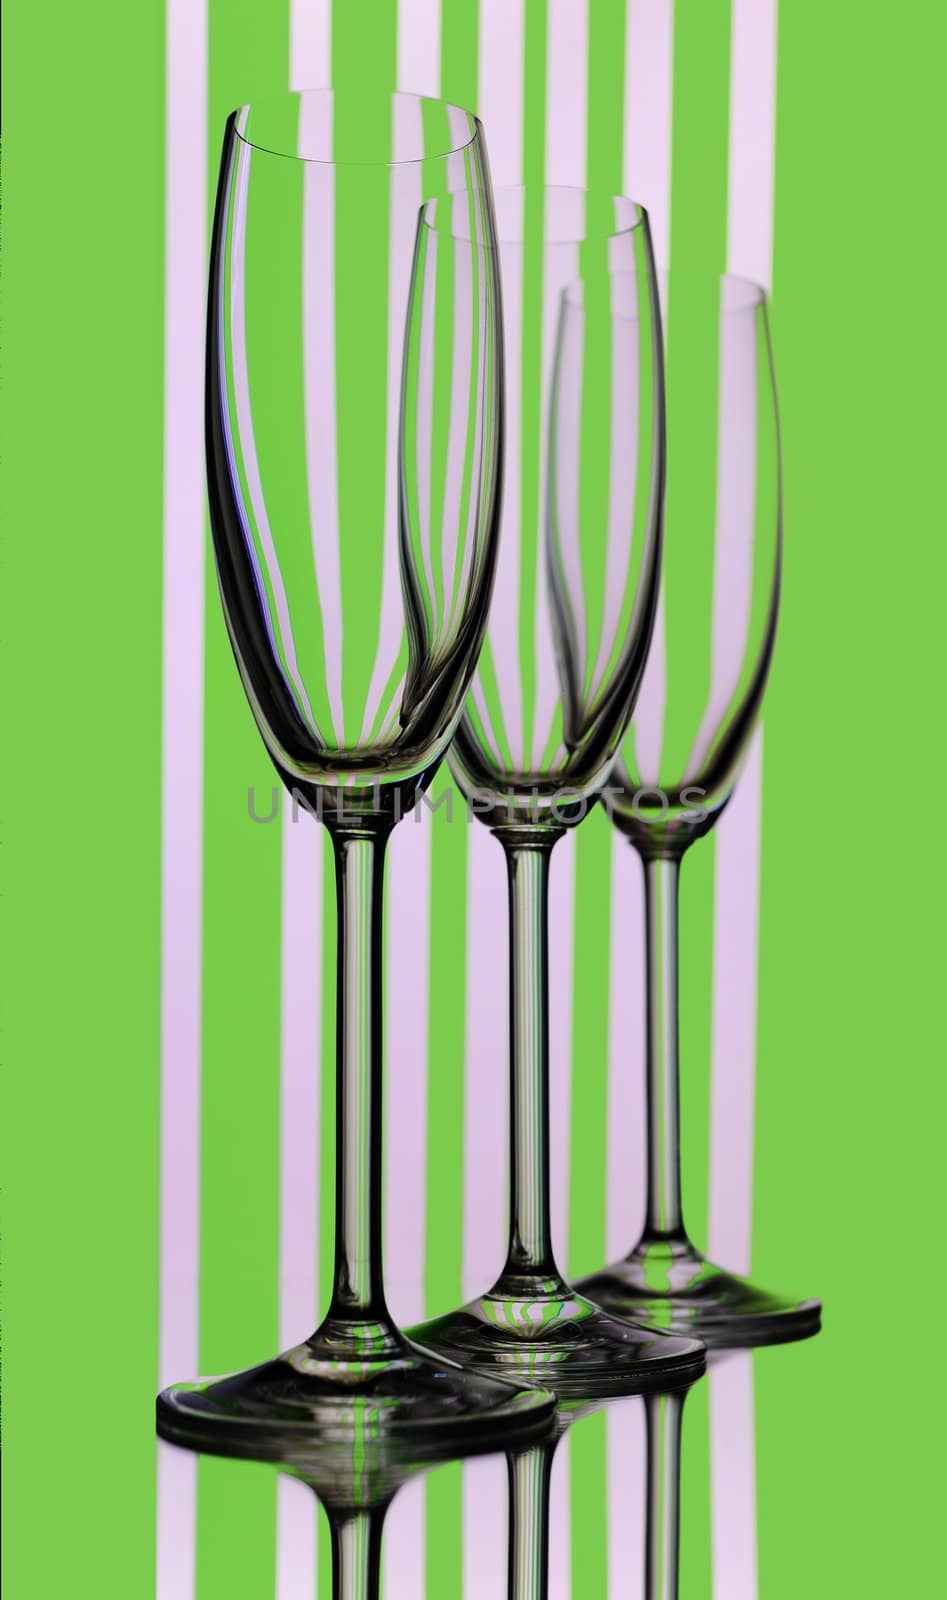 Three Elegant Tall Wineglass For Champagne  Over Striped  Background.